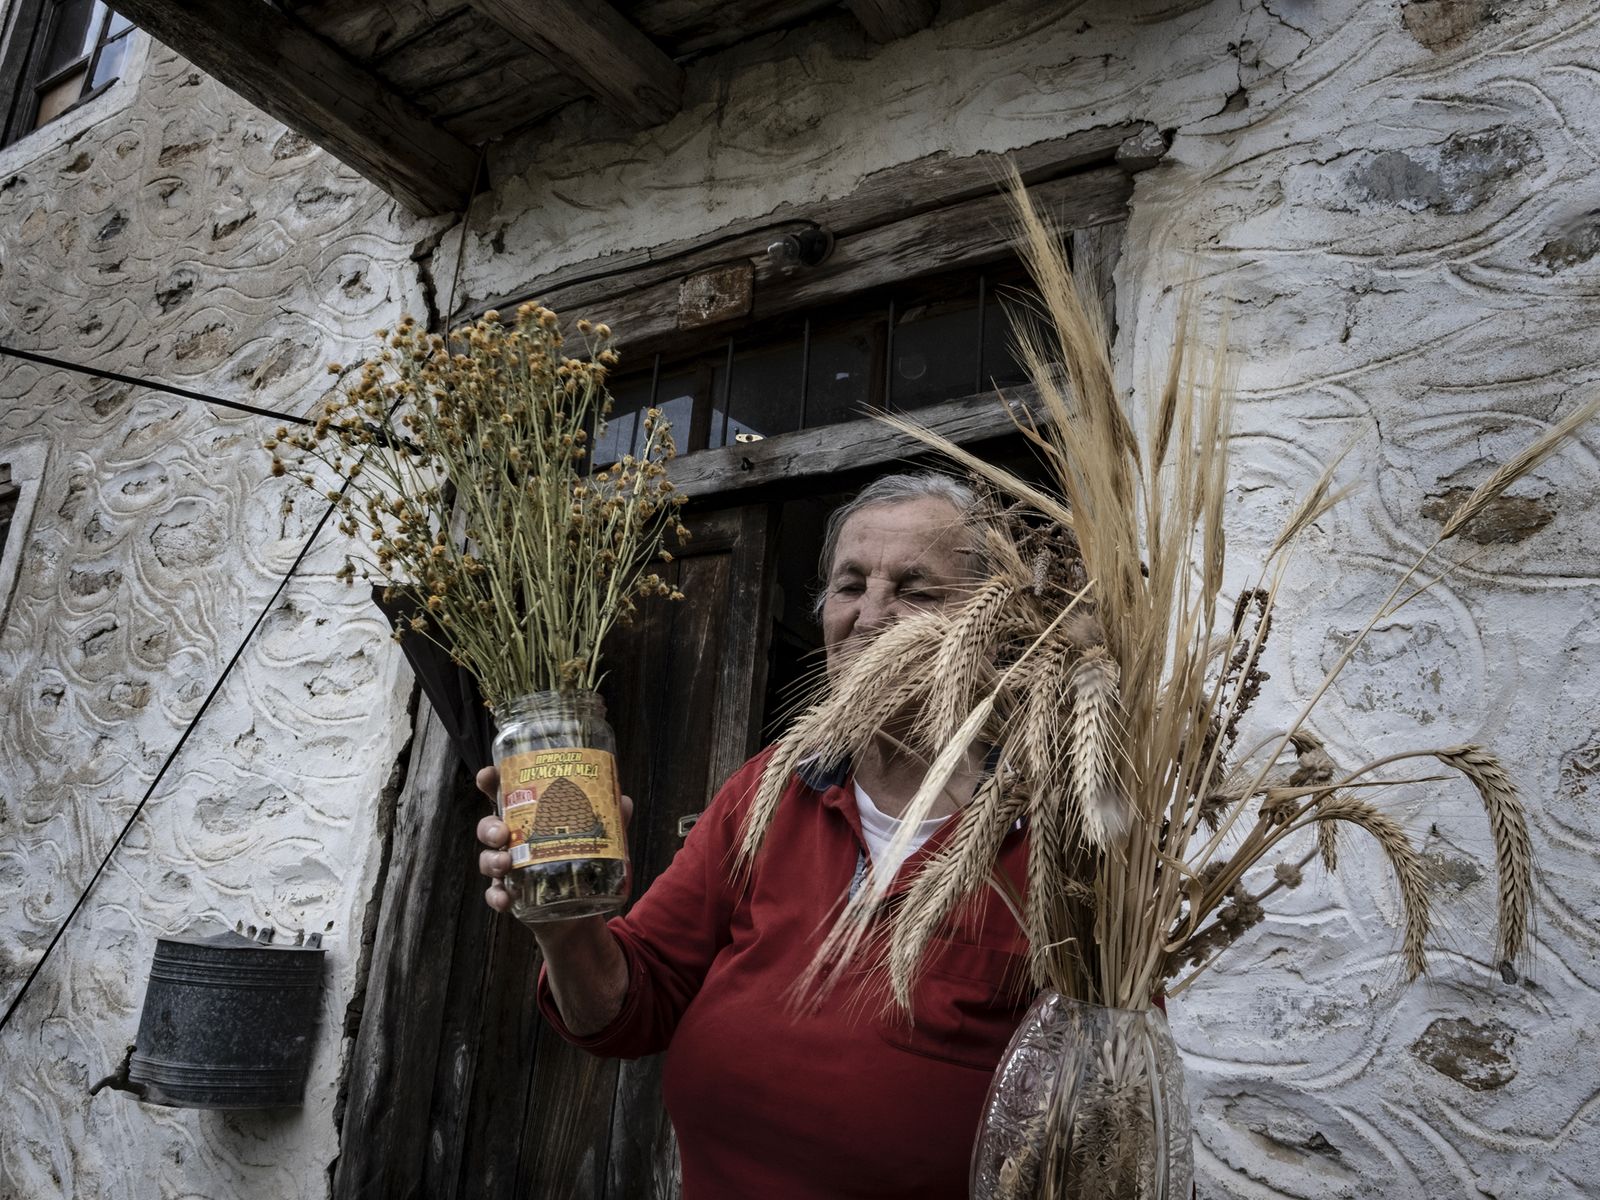 © Jana Hunterová - Dobrica, Zašle, Macedonia (13.8. 2022) Medicinal herbs are an important part of the life of people high in the mountains.